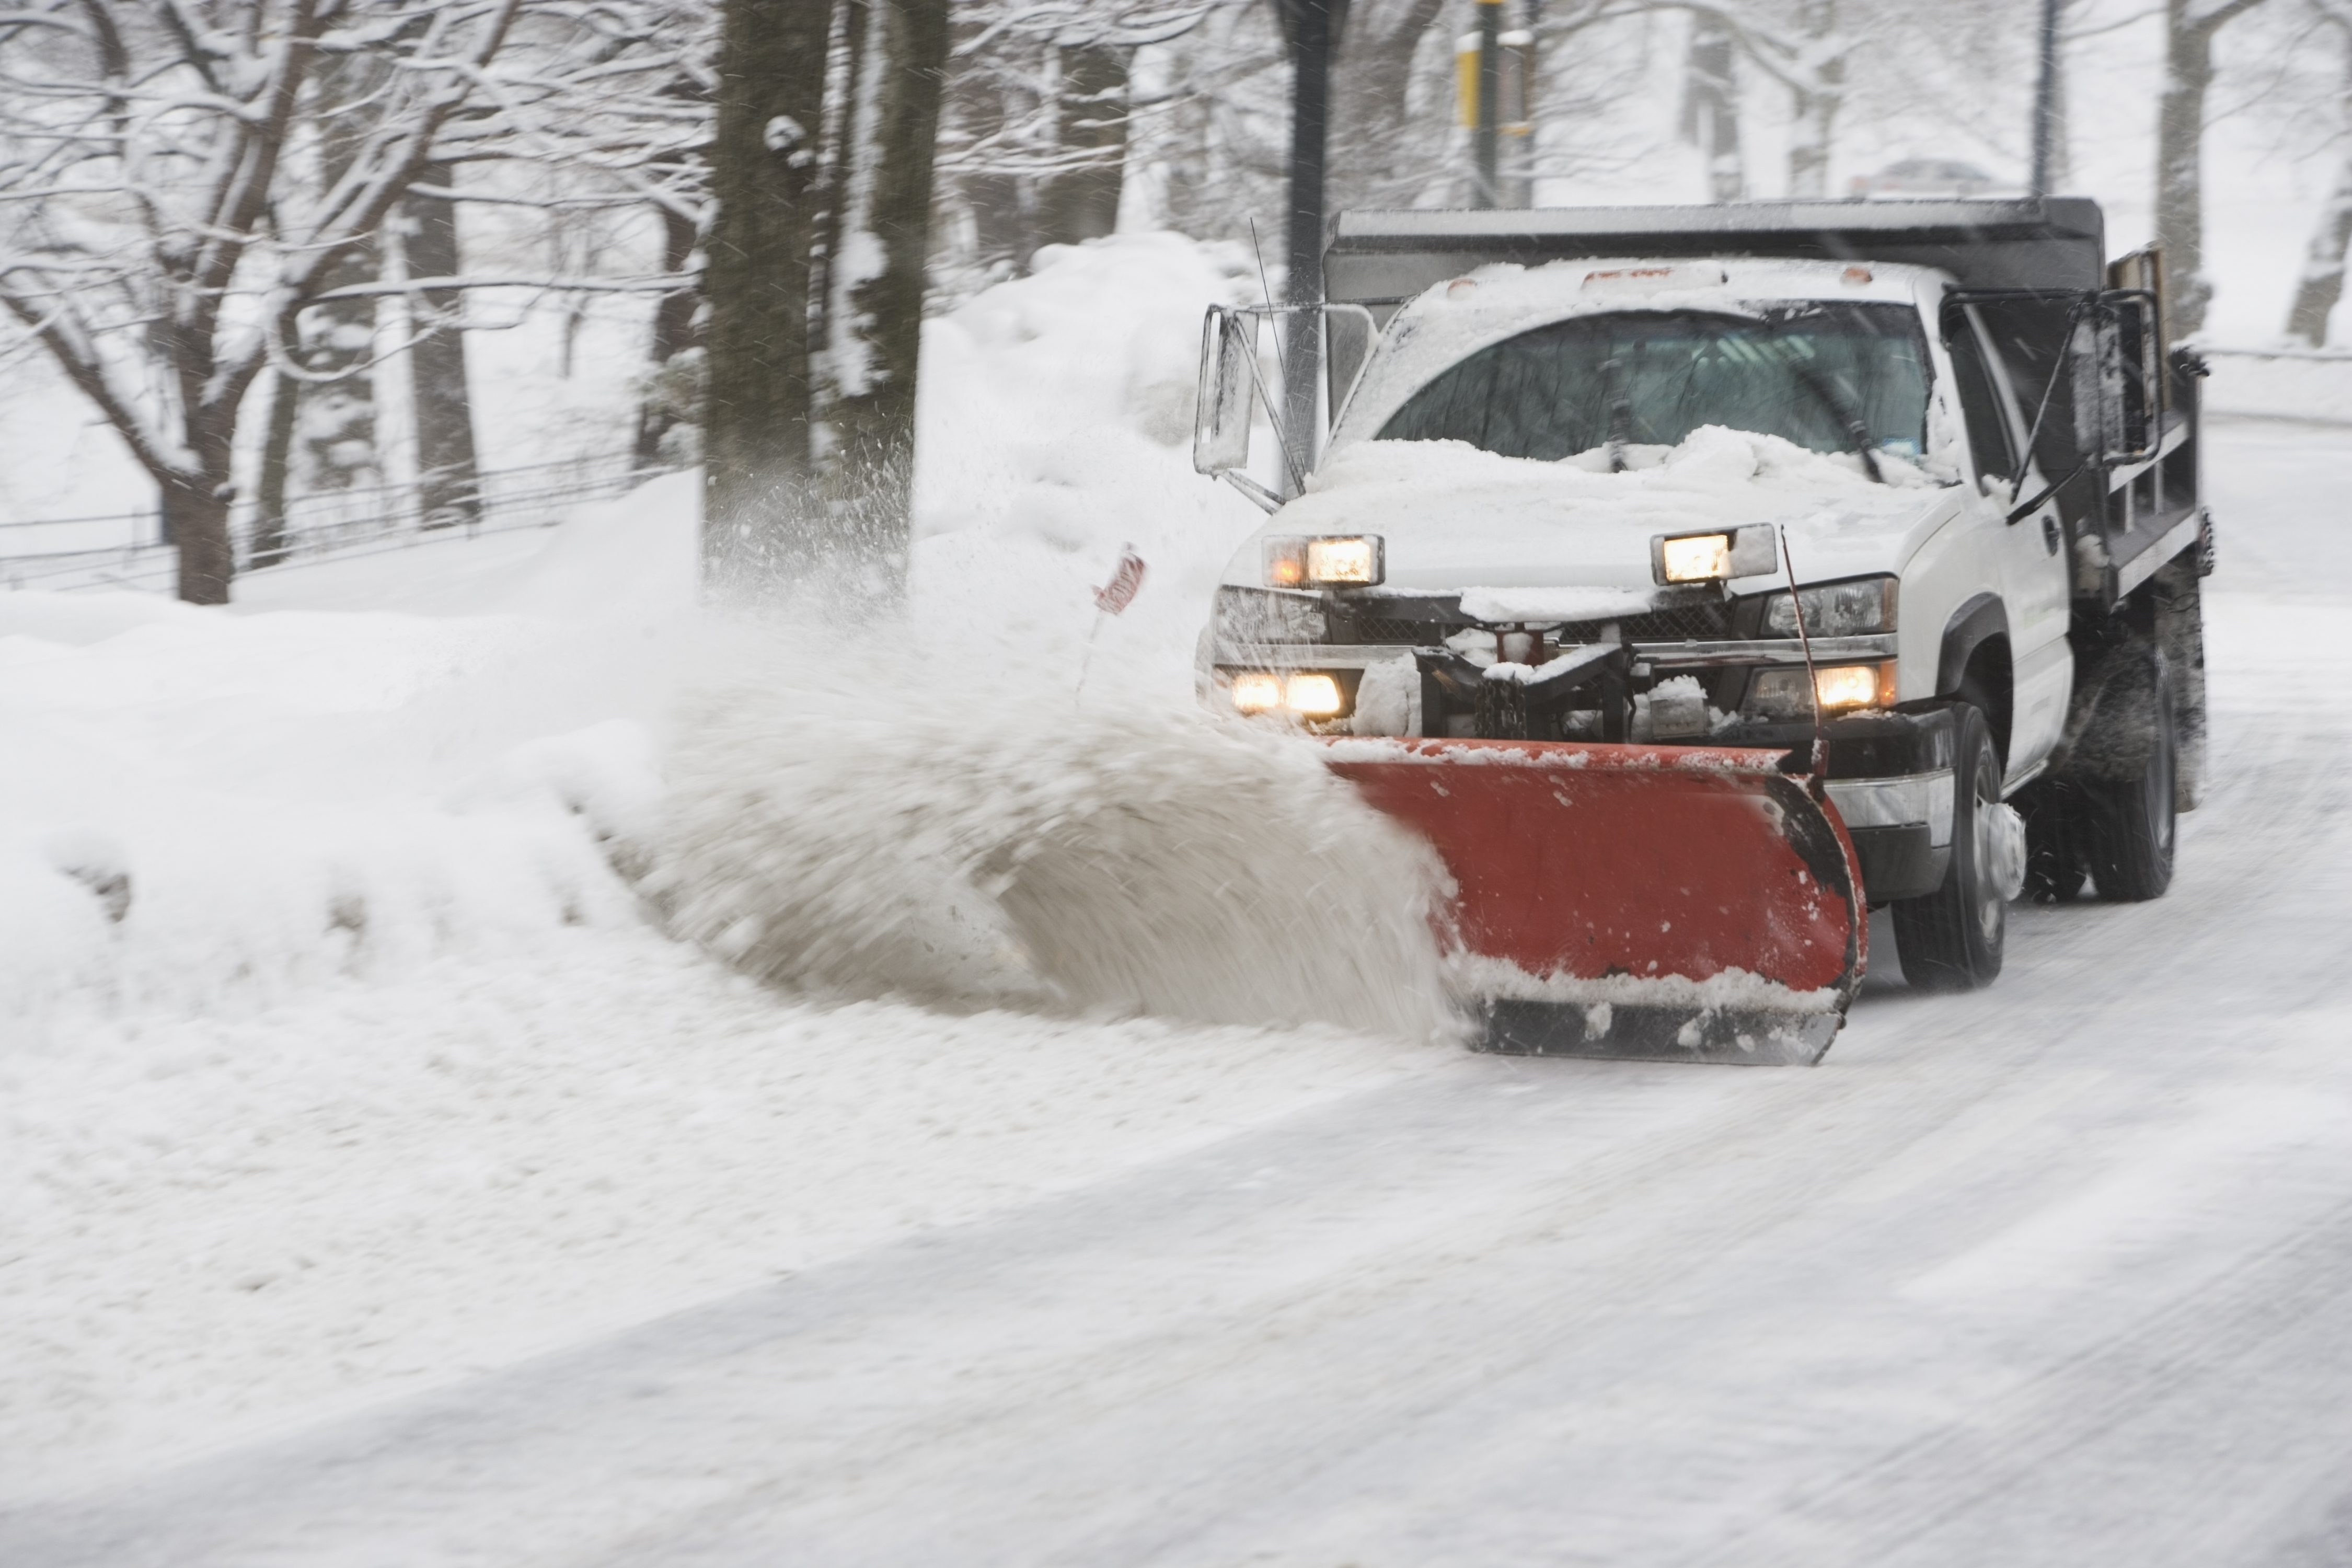 Truck plowing snow. (Getty Images)